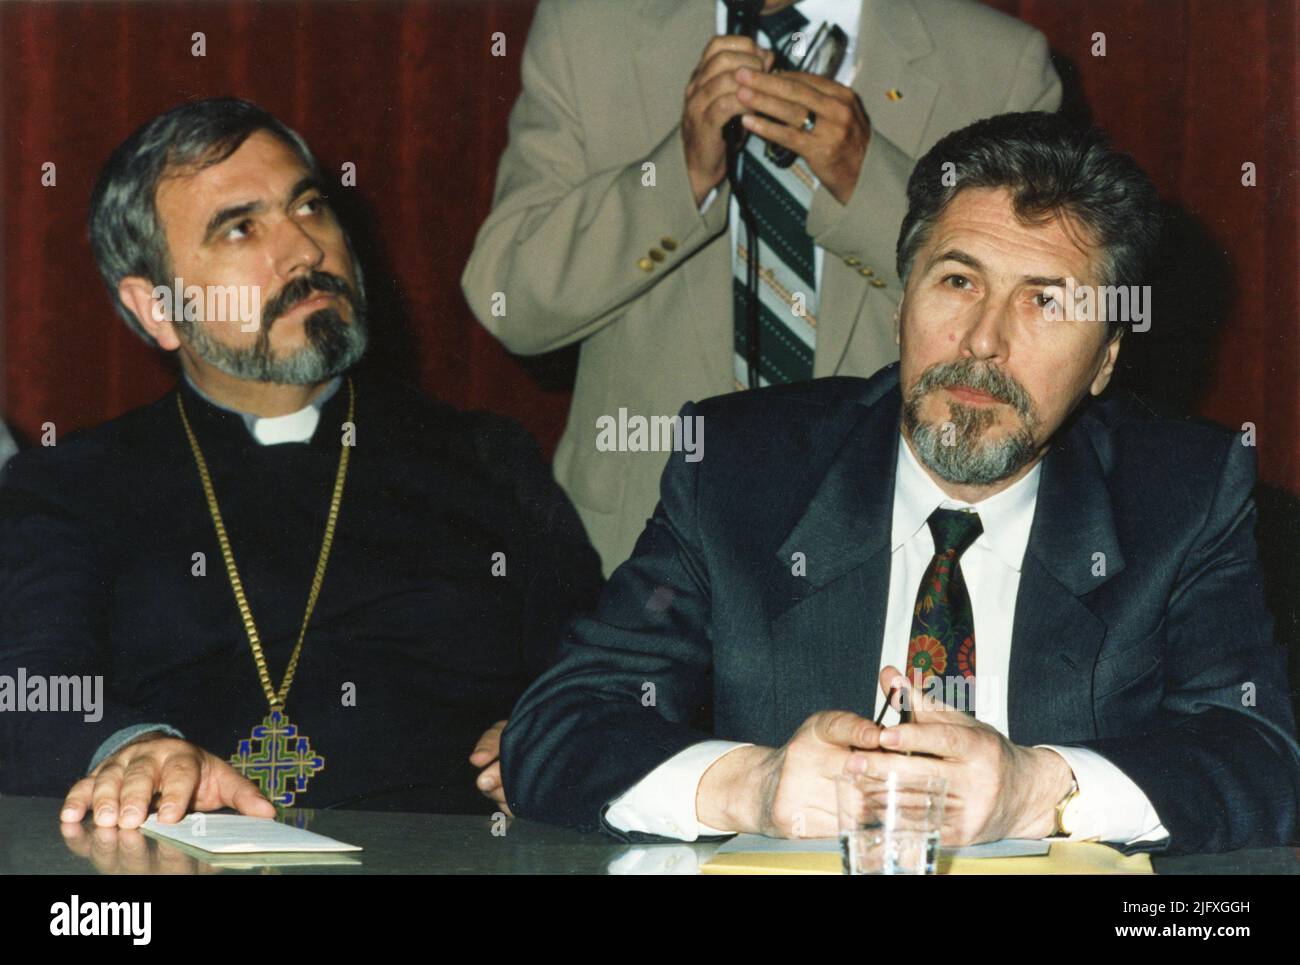 Los Angeles, CA, USA, 1997. Romanian presidential candidate Emil Constantinescu (right) visiting the Romanian diaspora in the U.S.A.  On the left, Christian- Orthodox priest Constantin Alecse. Stock Photo